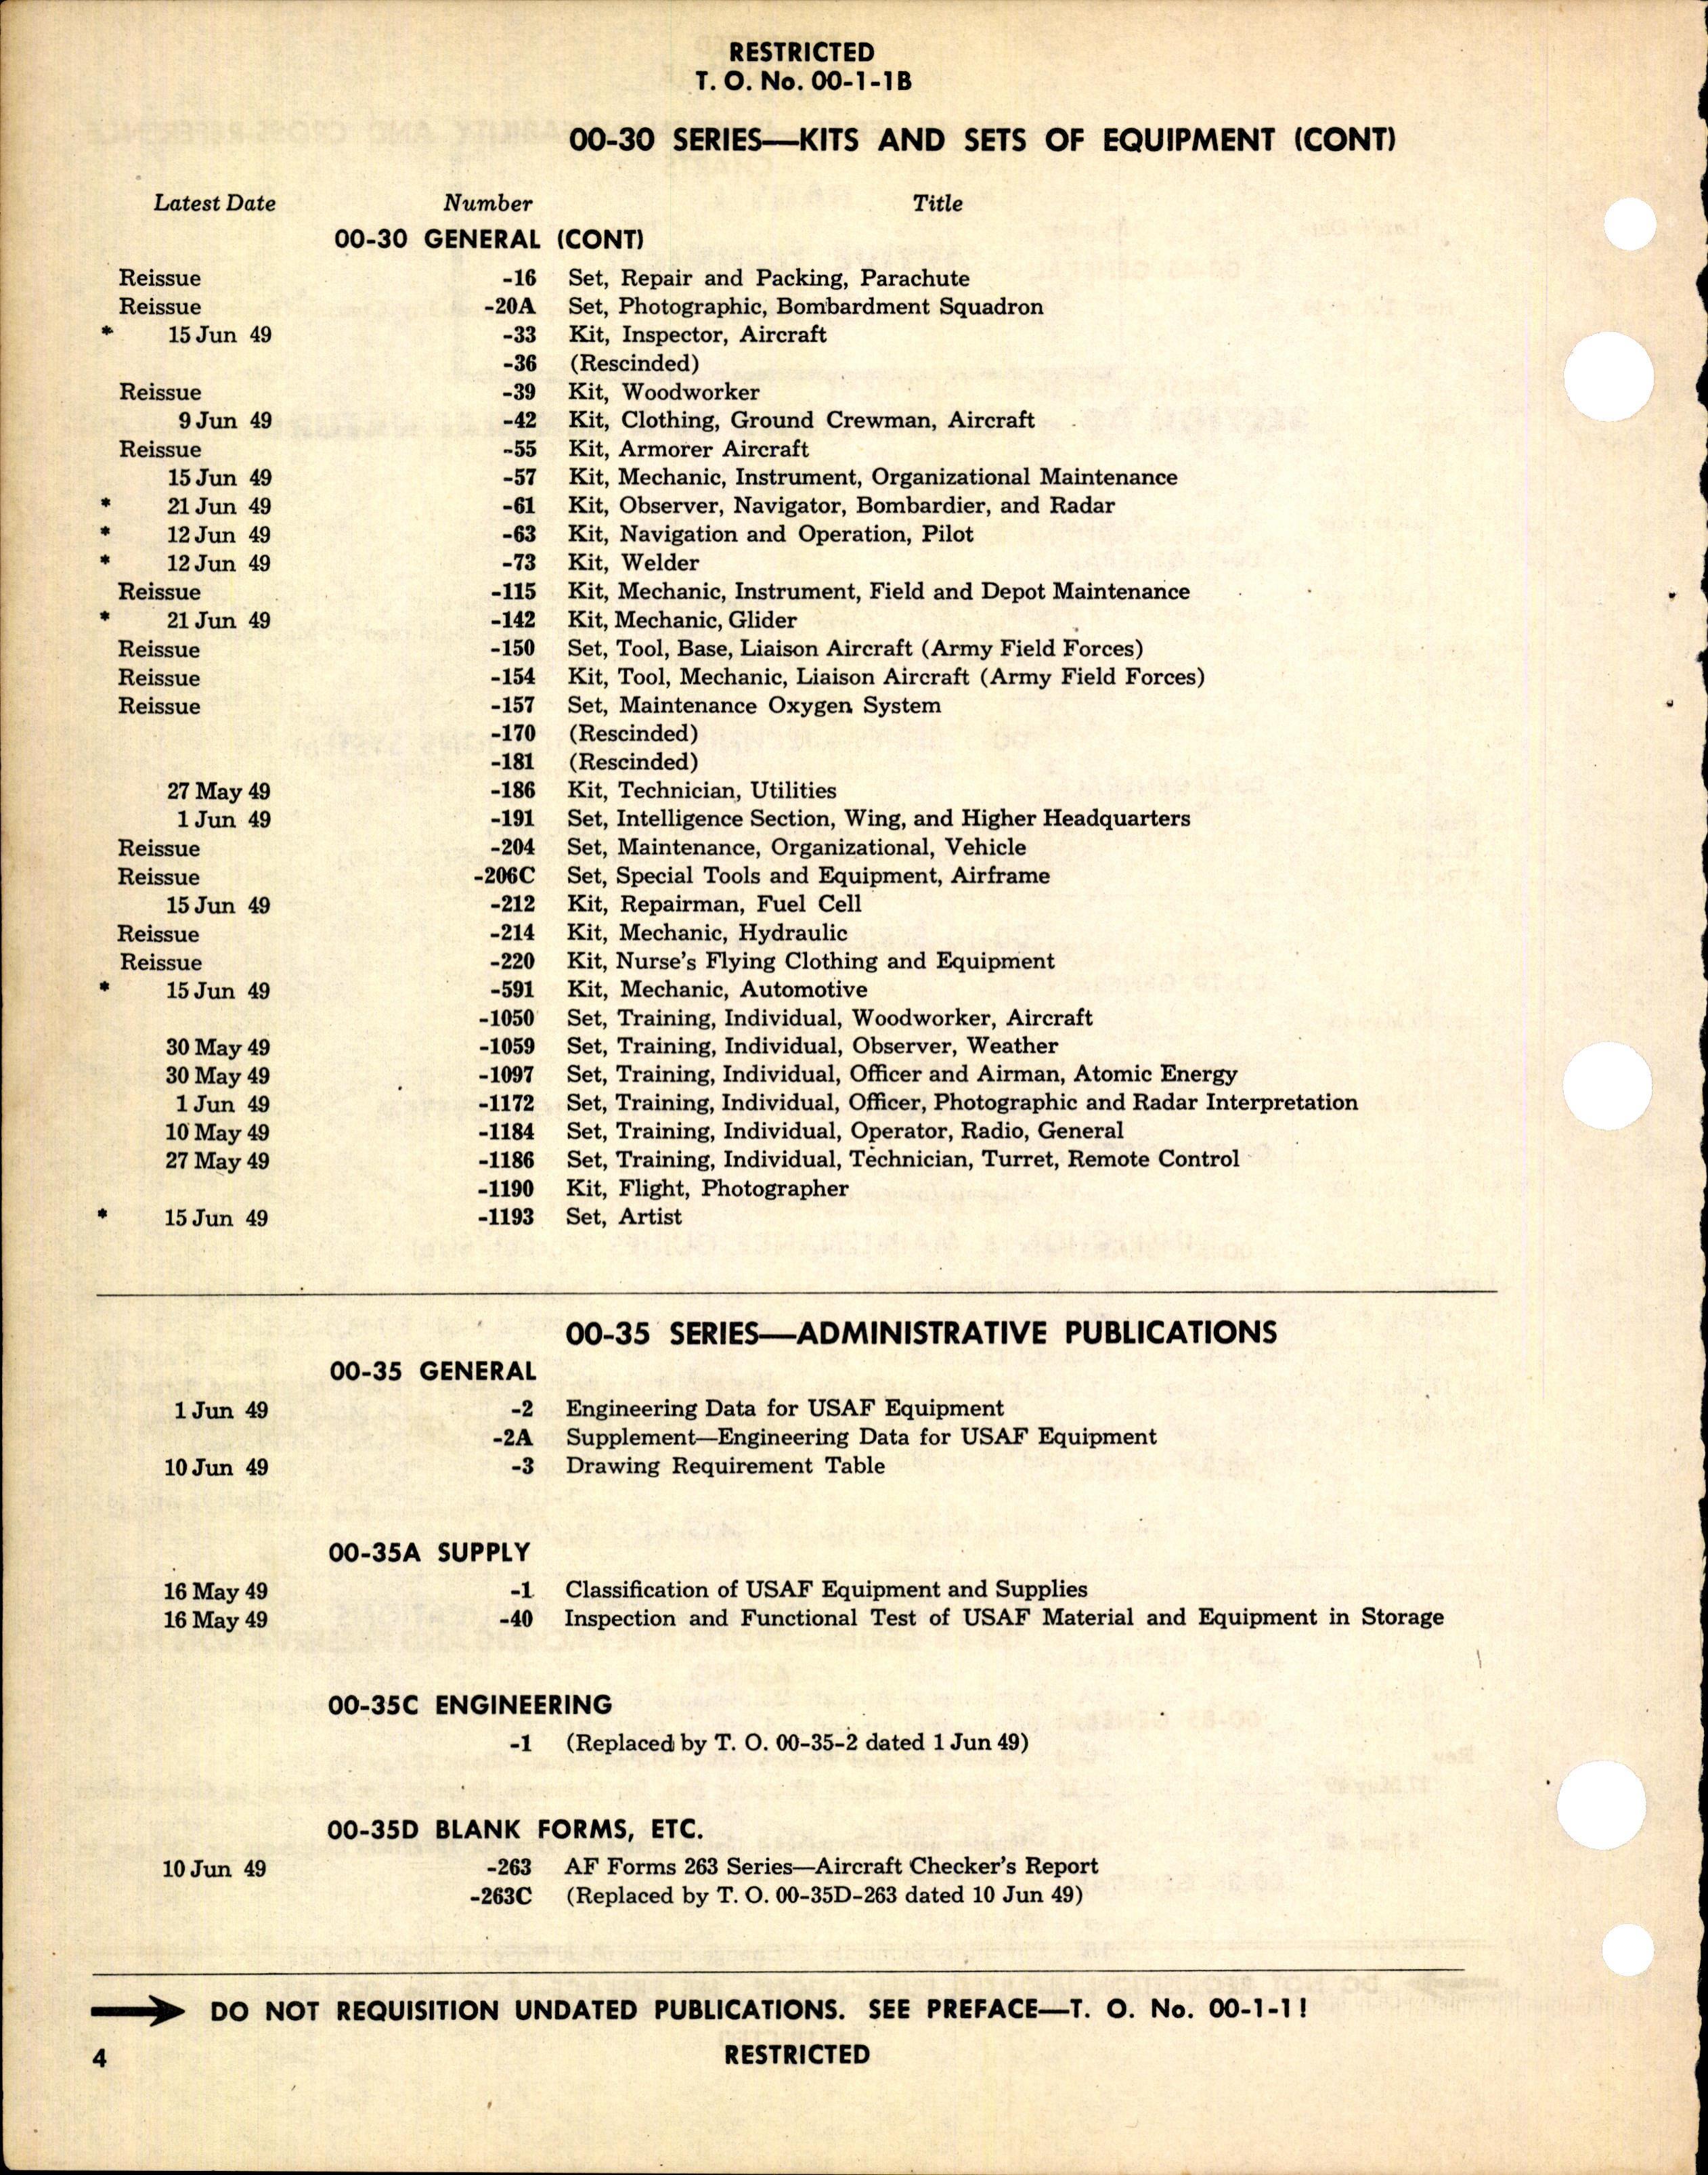 Sample page 4 from AirCorps Library document: Numerical List of Technical Publications